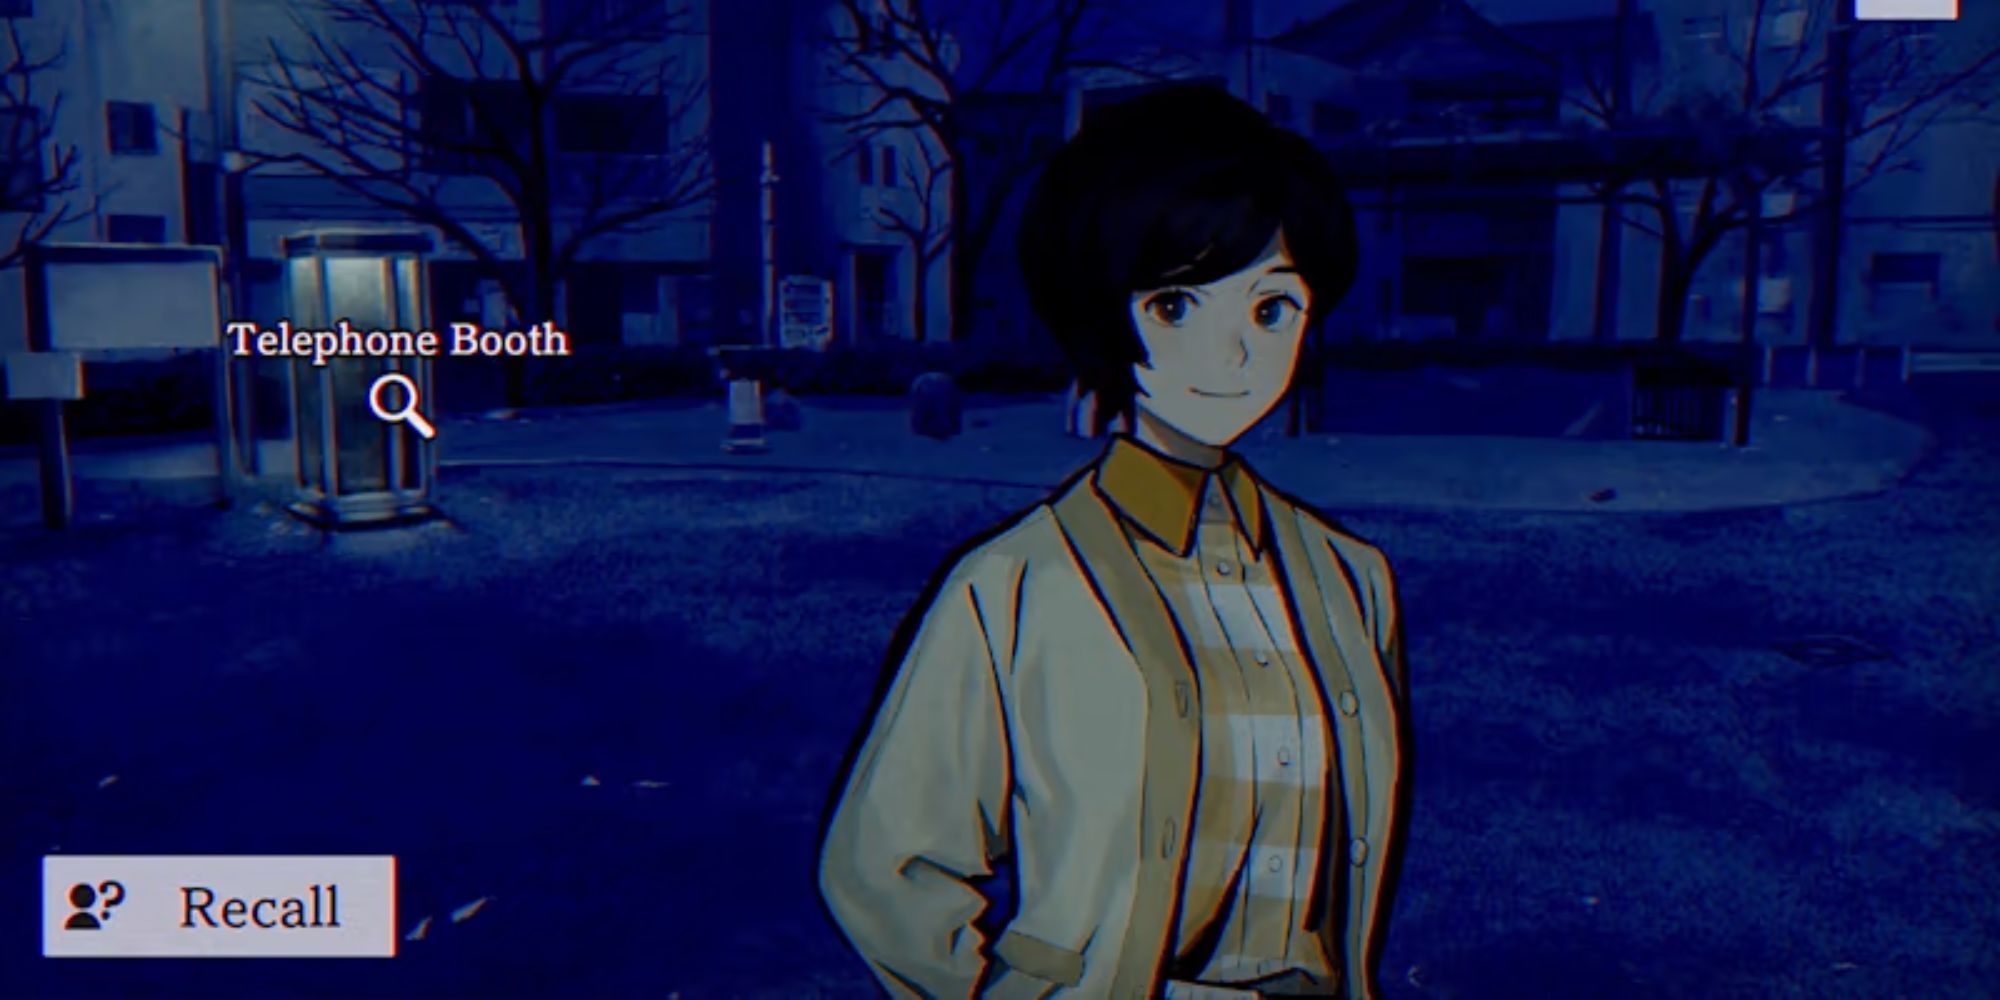 Yoko stands in a park at night